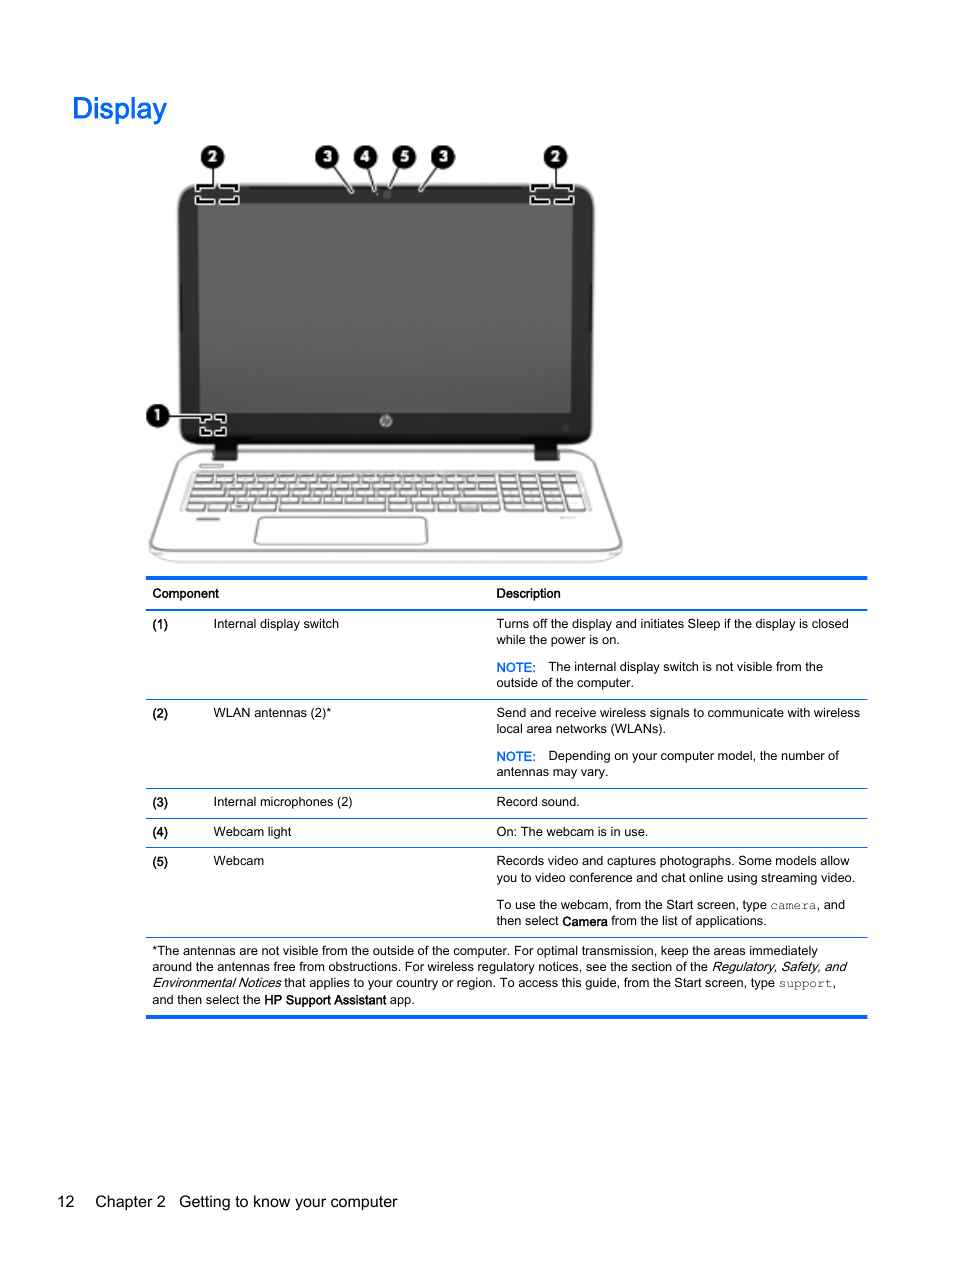 Display | HP ENVY 15t-k000 CTO Notebook PC User Manual | Page 24 / 93